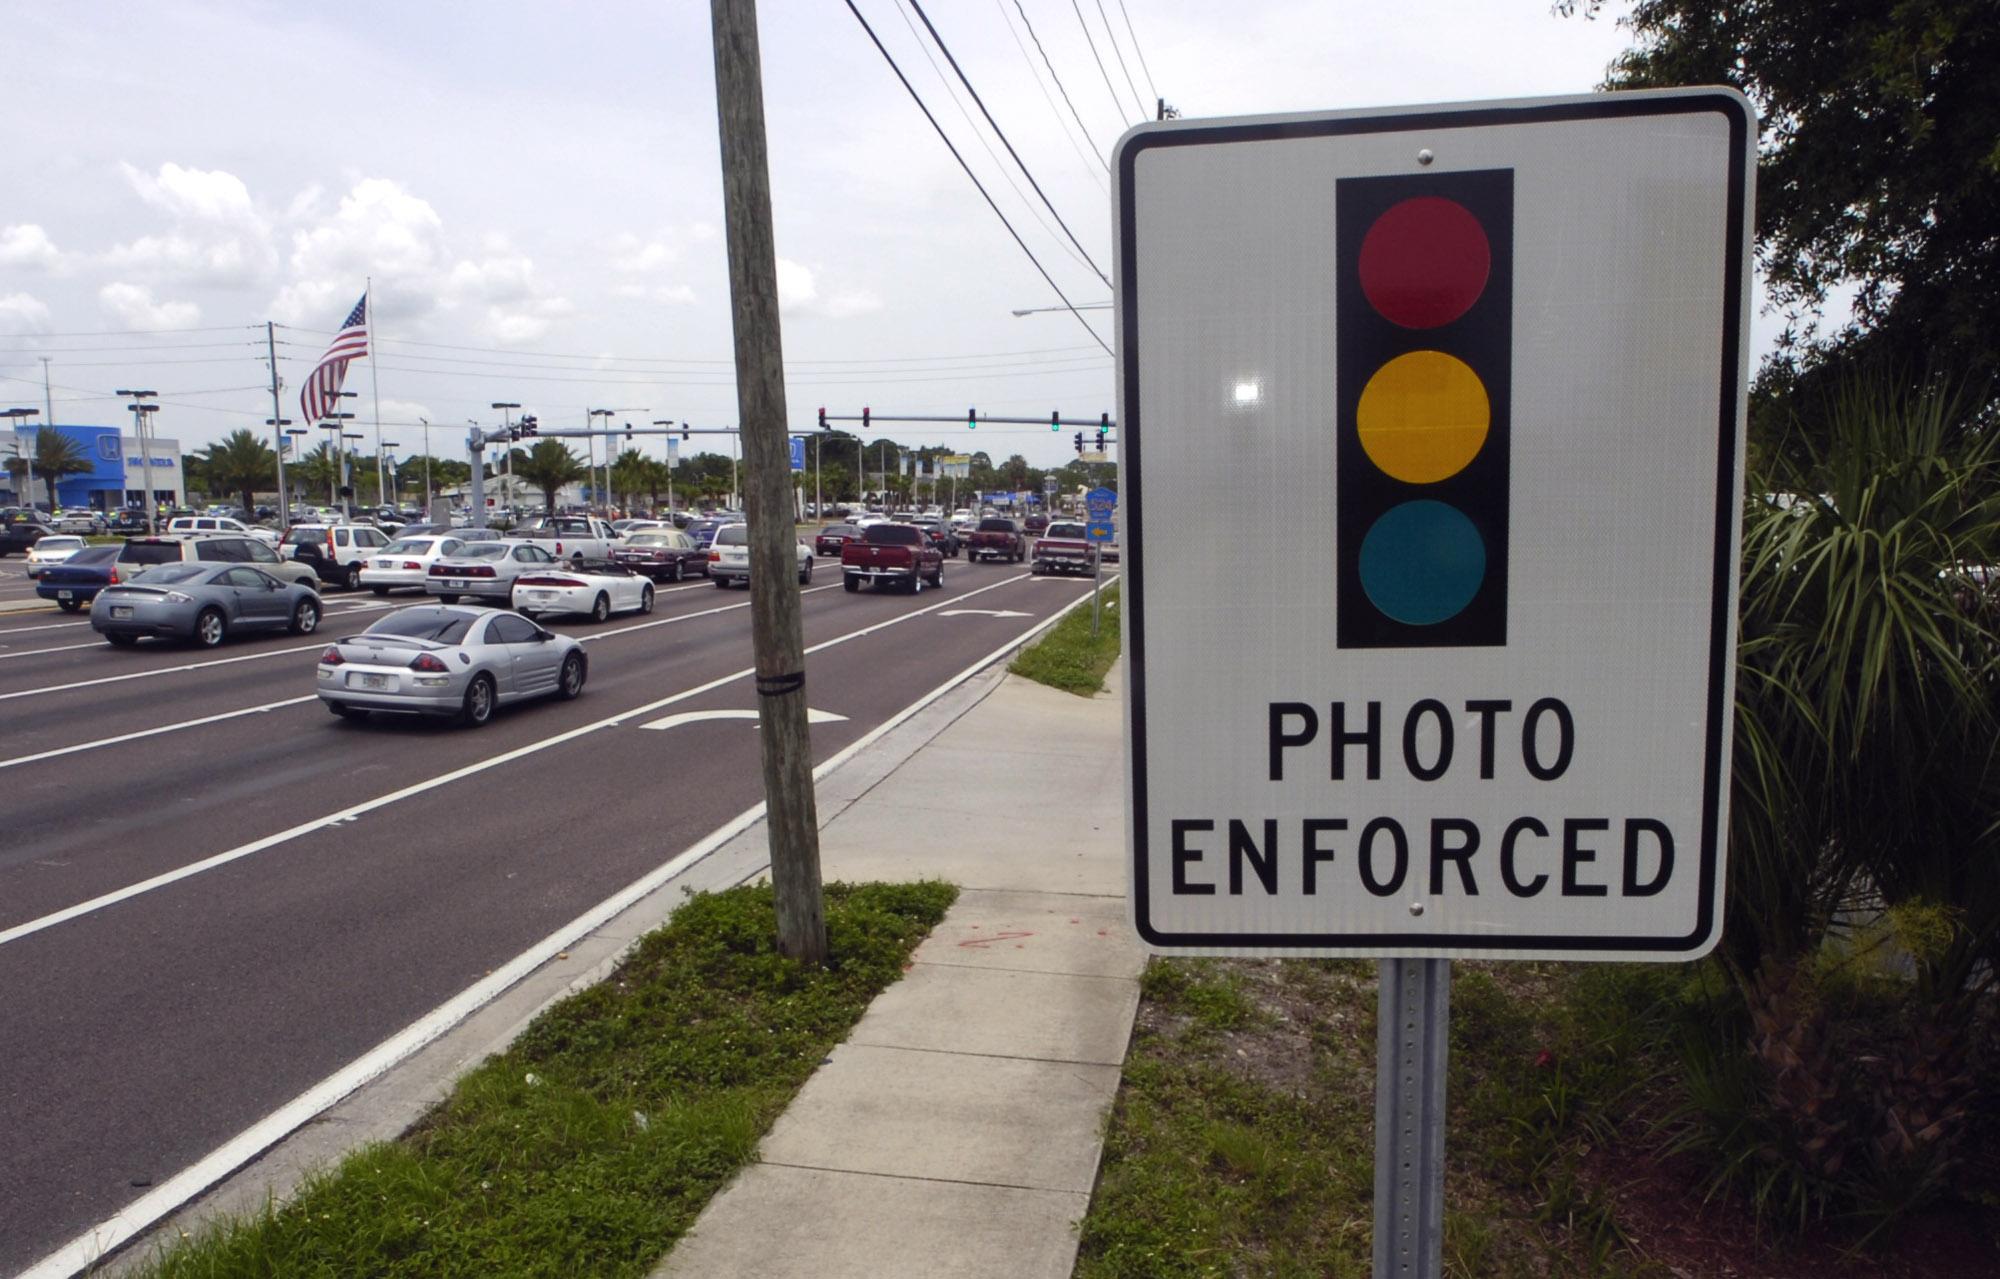 photoblocker.us at WI. No More Red Light Camera Tickets. Make Your